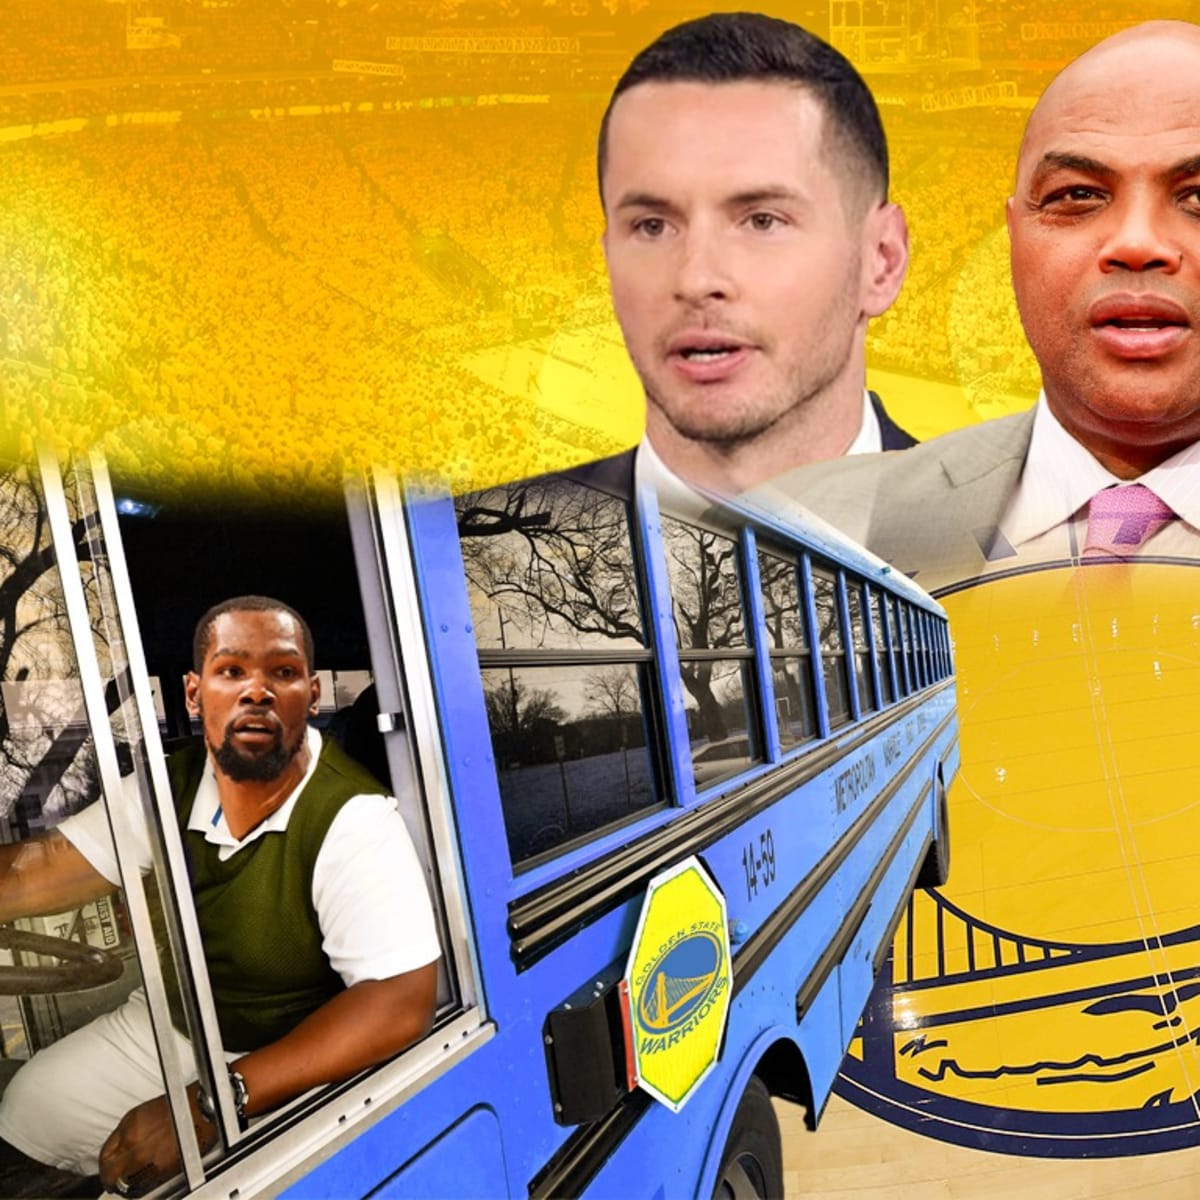 Charles Barkley in 2020: “Kevin Durant was a bus rider not a bus driver in  Golden State” -- it's crazy he's been calling this from the start : r/nba